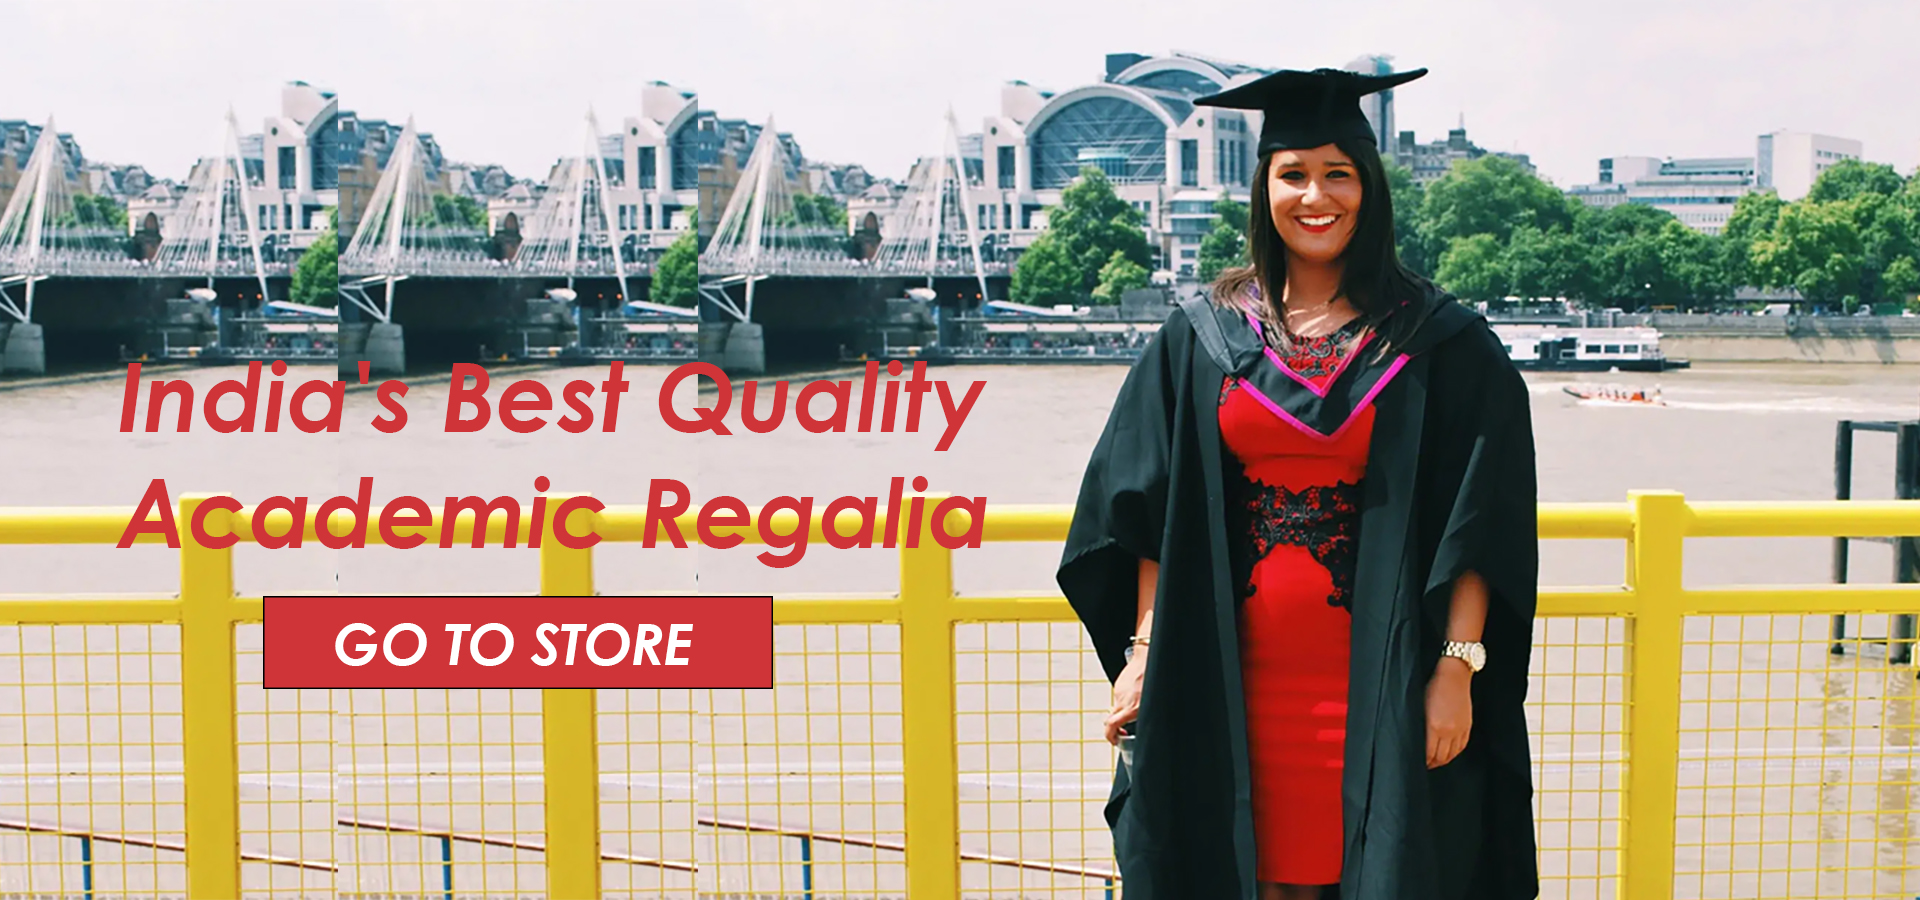 Buy Matte Fabric Black Convocation/Graduation Gown, Hat And Orange Sash at  Amazon.in